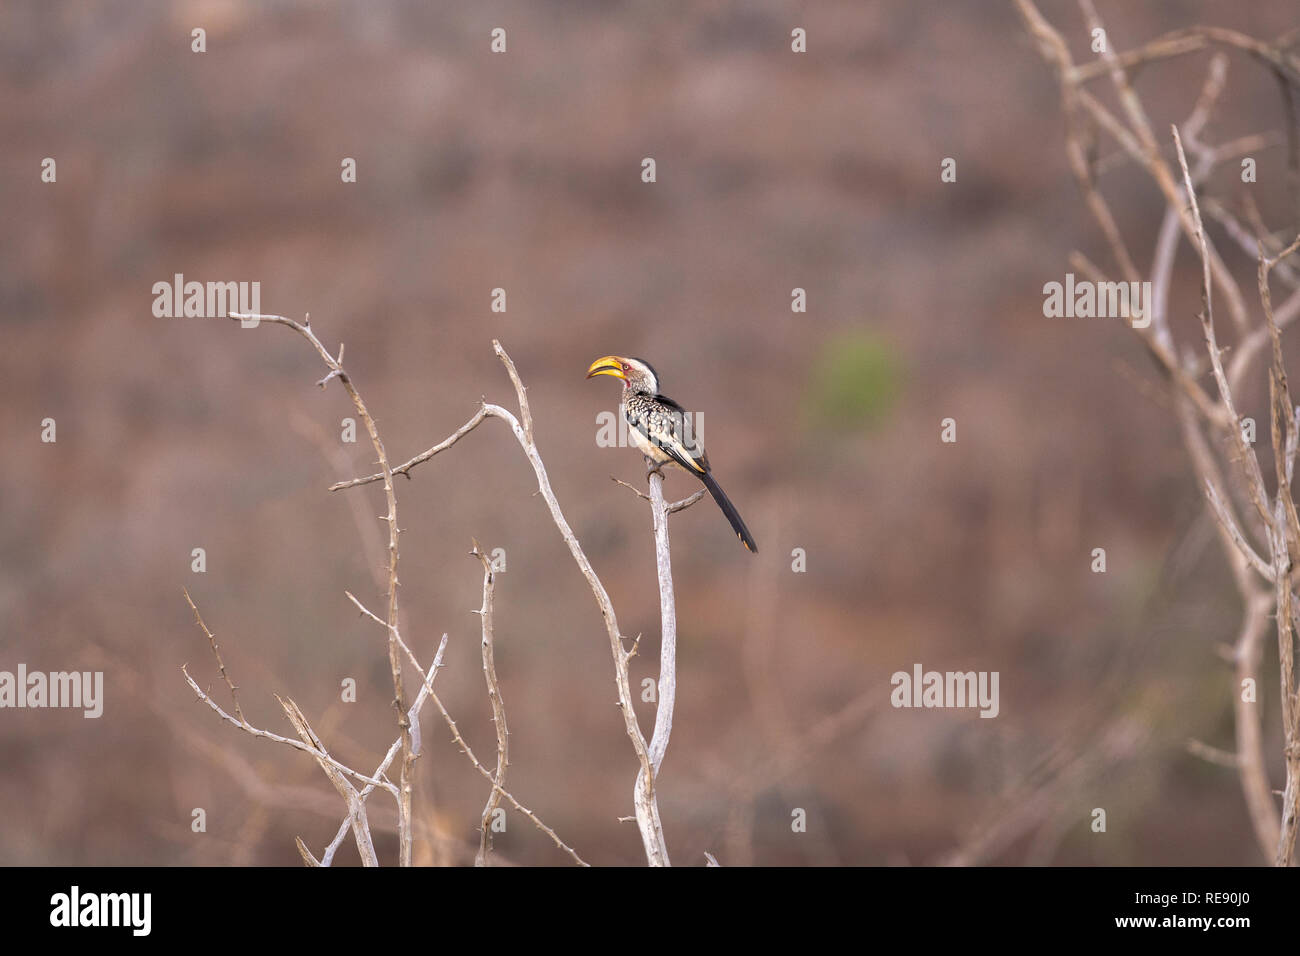 image of a southern yellow-billed hornbill perched on a branch Stock Photo